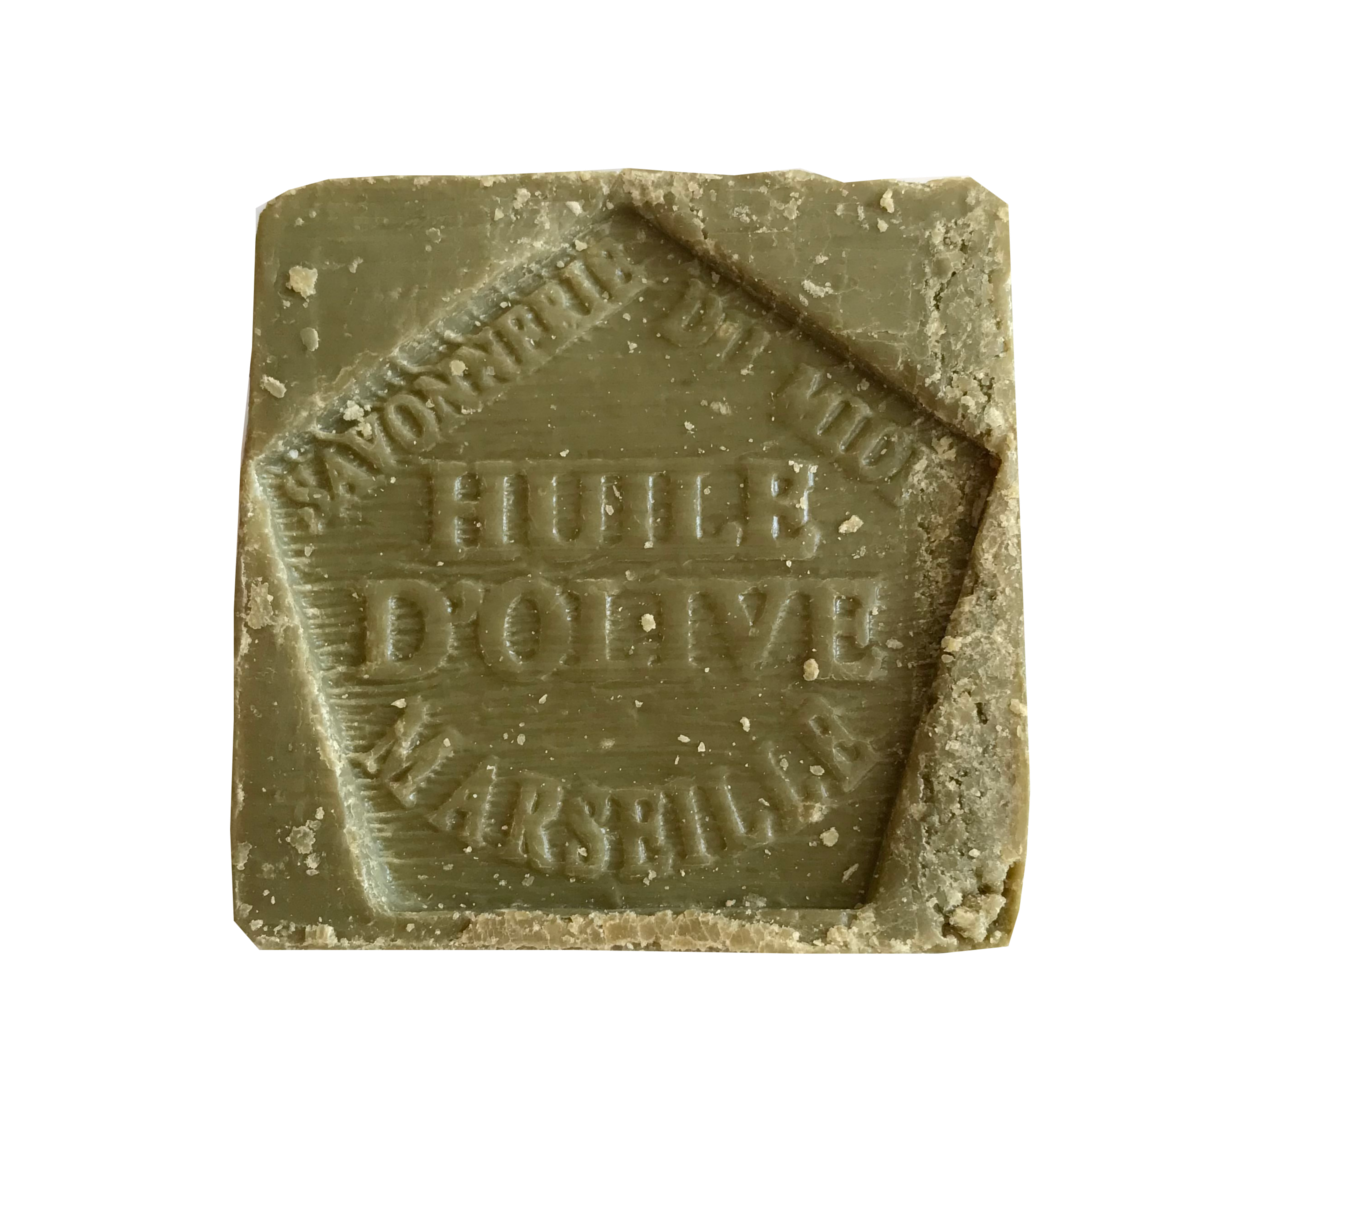 A chunky cube of olive green soap imprinted with huile d'olive marseille